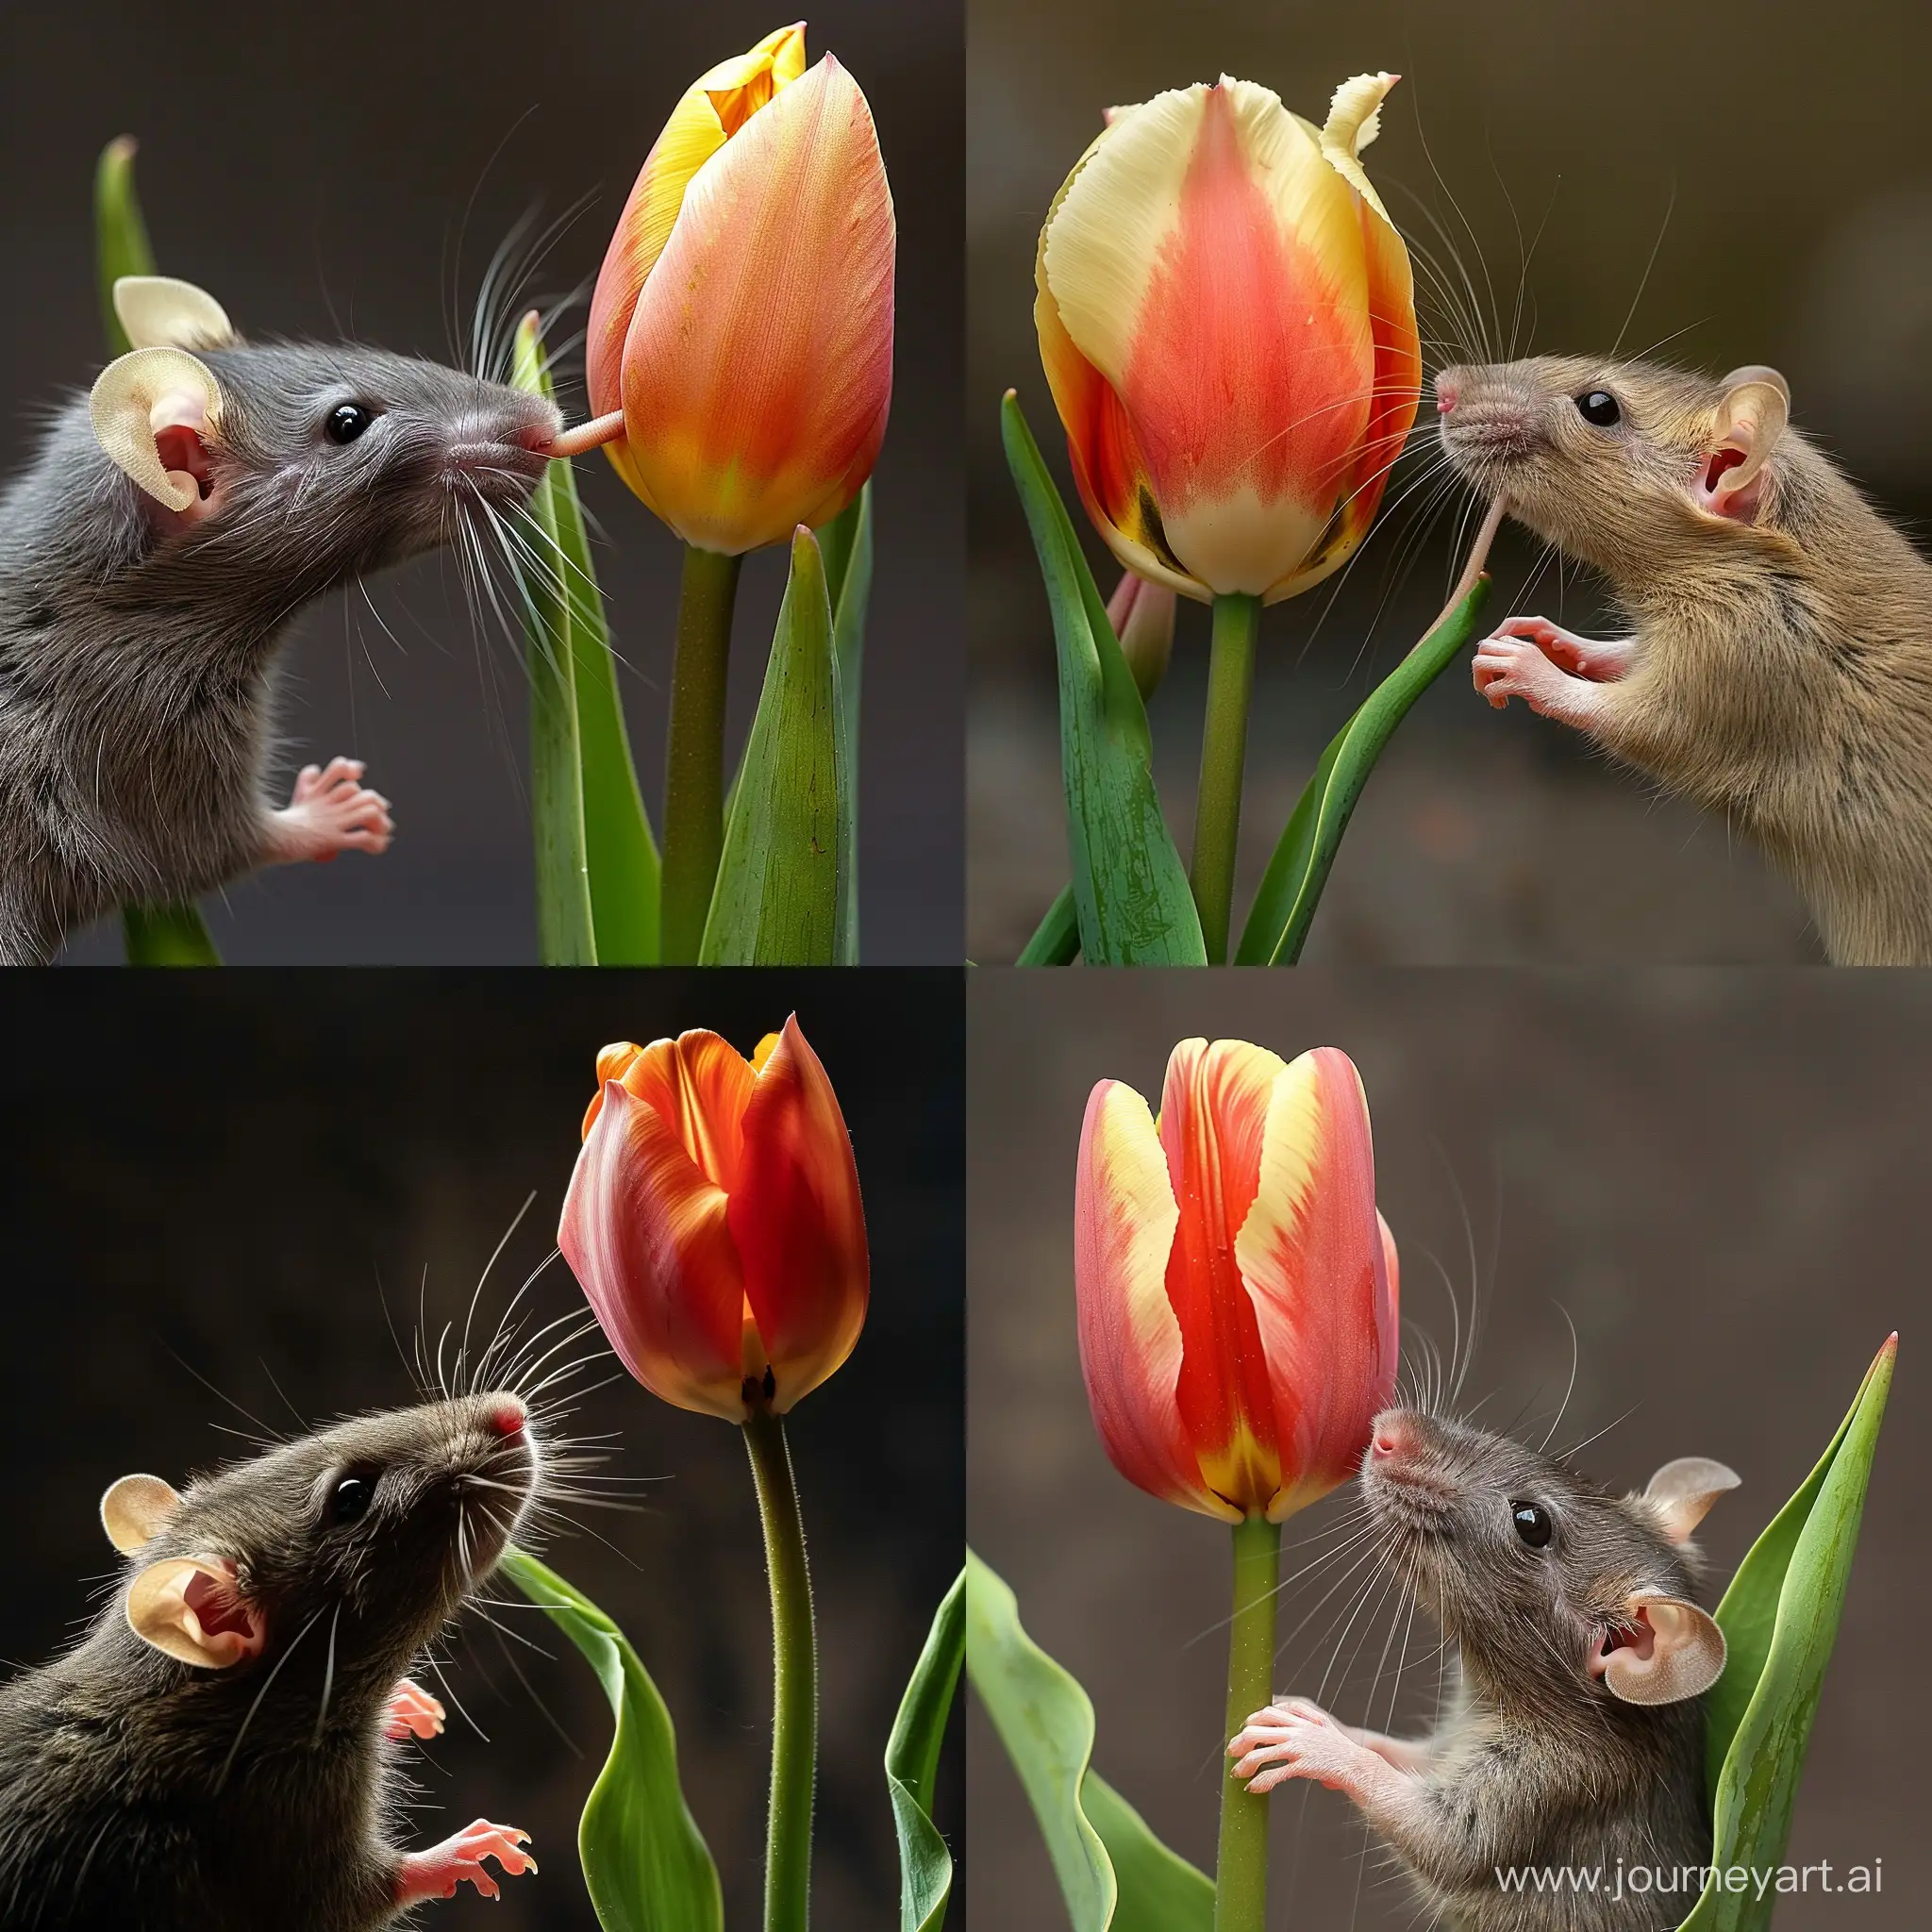 rat sniffing to a tulip